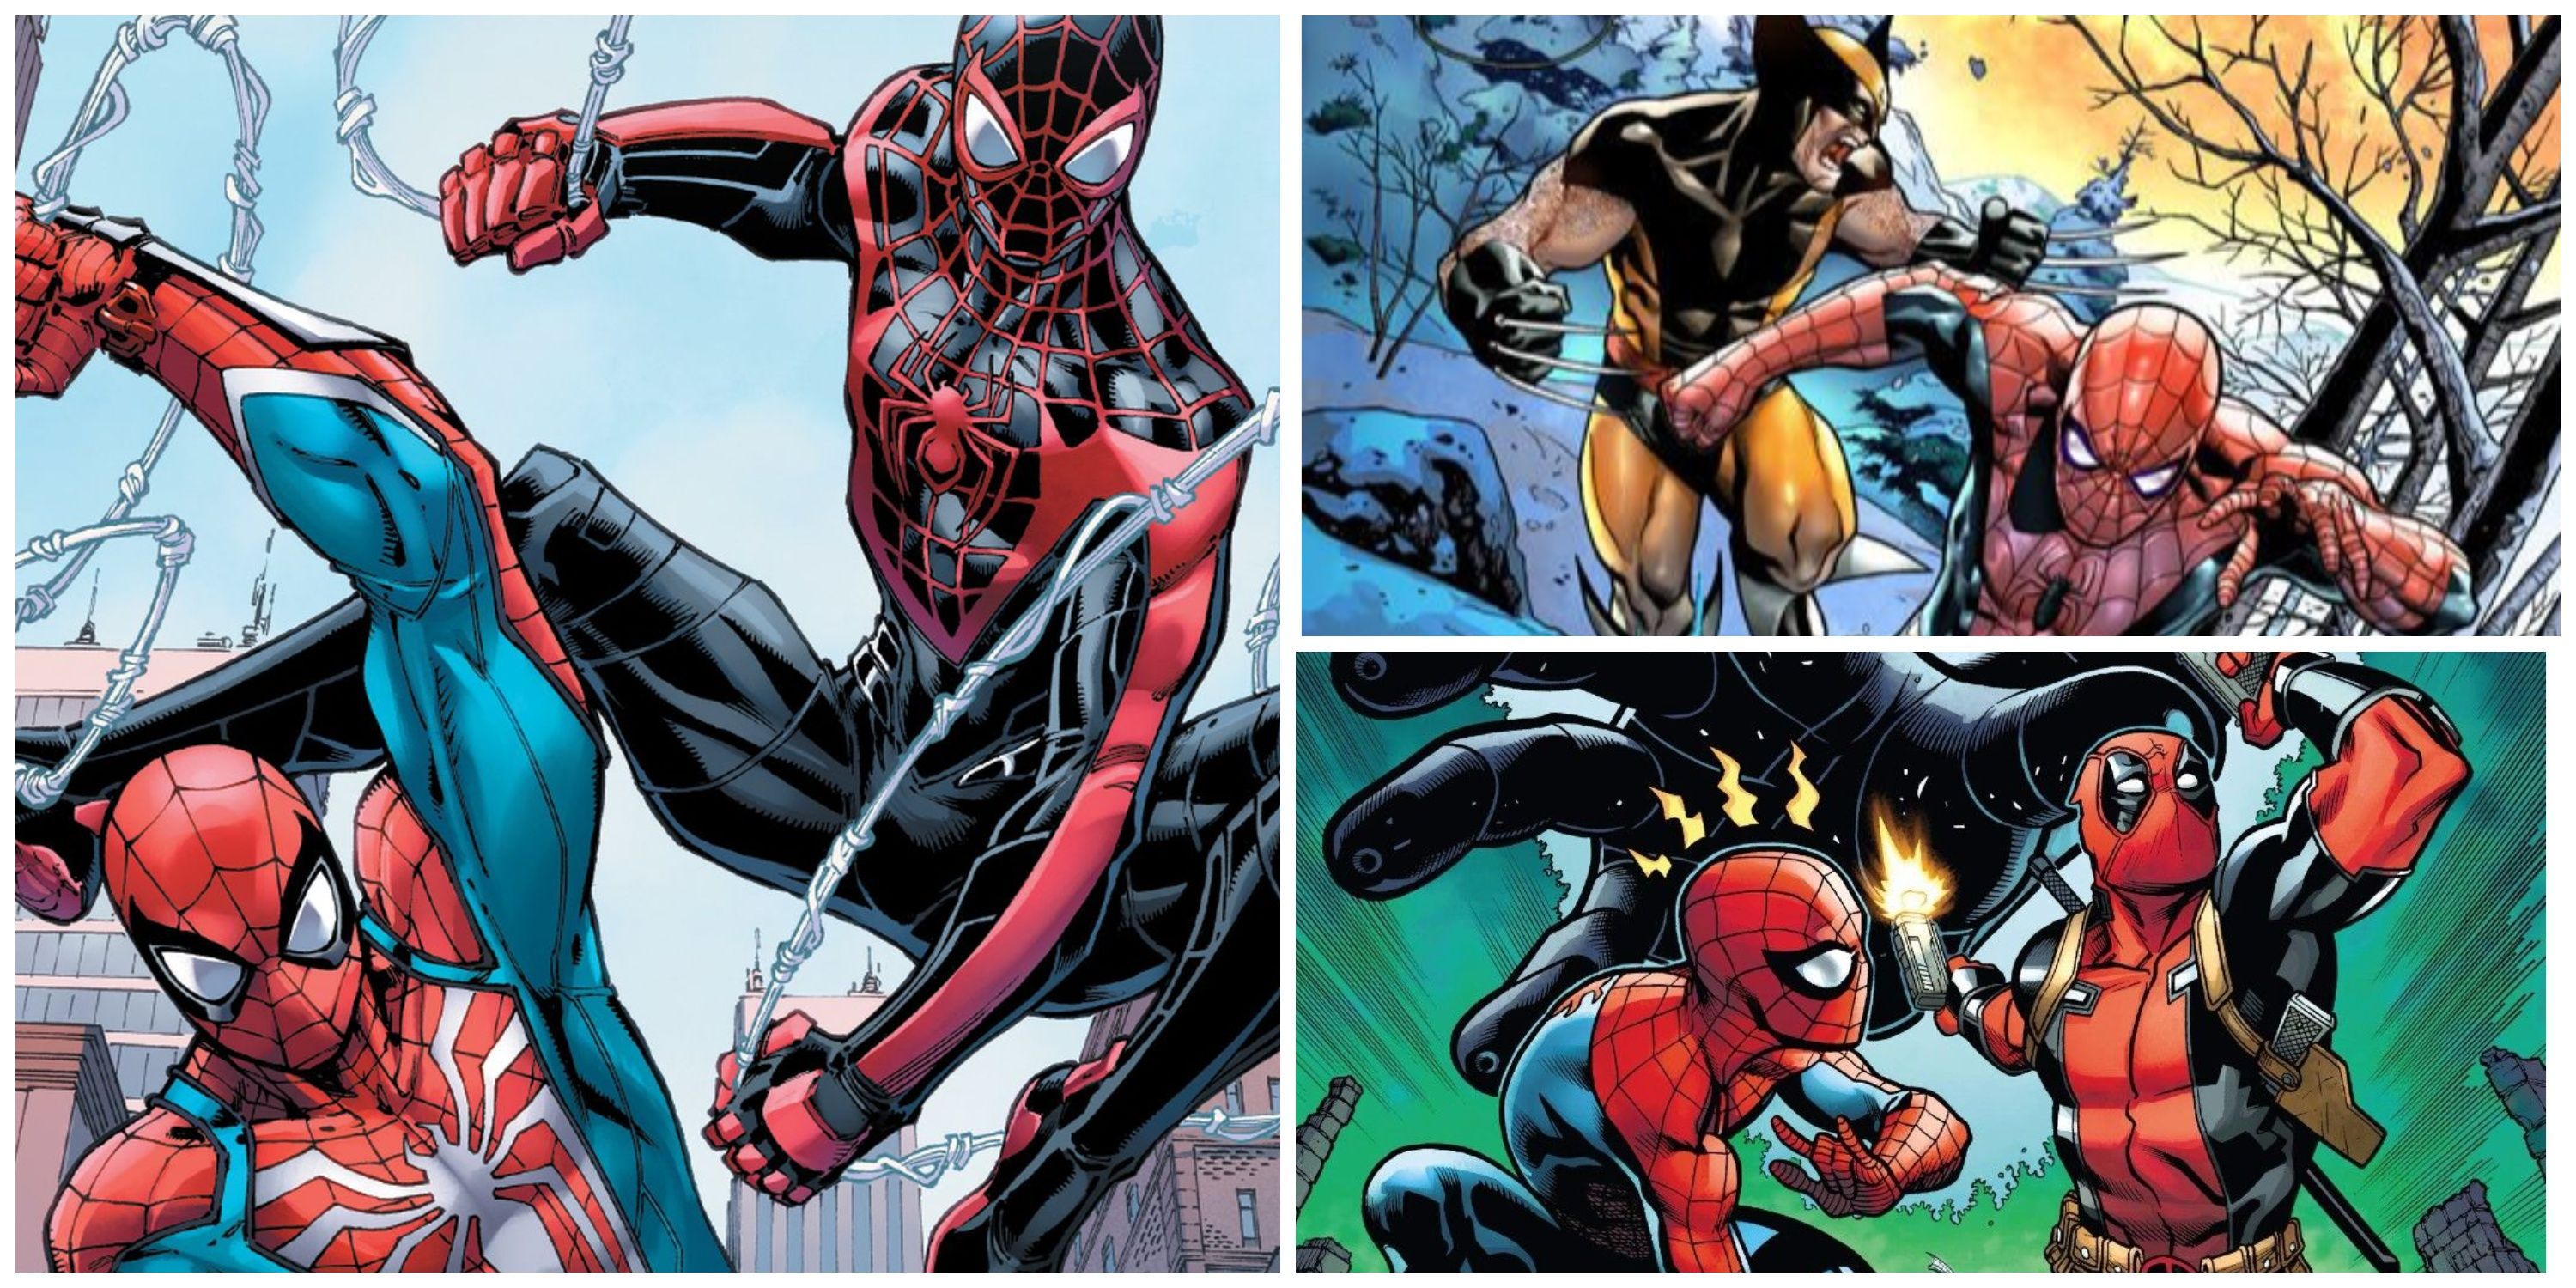 peter parker spider-man and miles morales spider-man, spider-man and deadpool, spider-man and wolverine